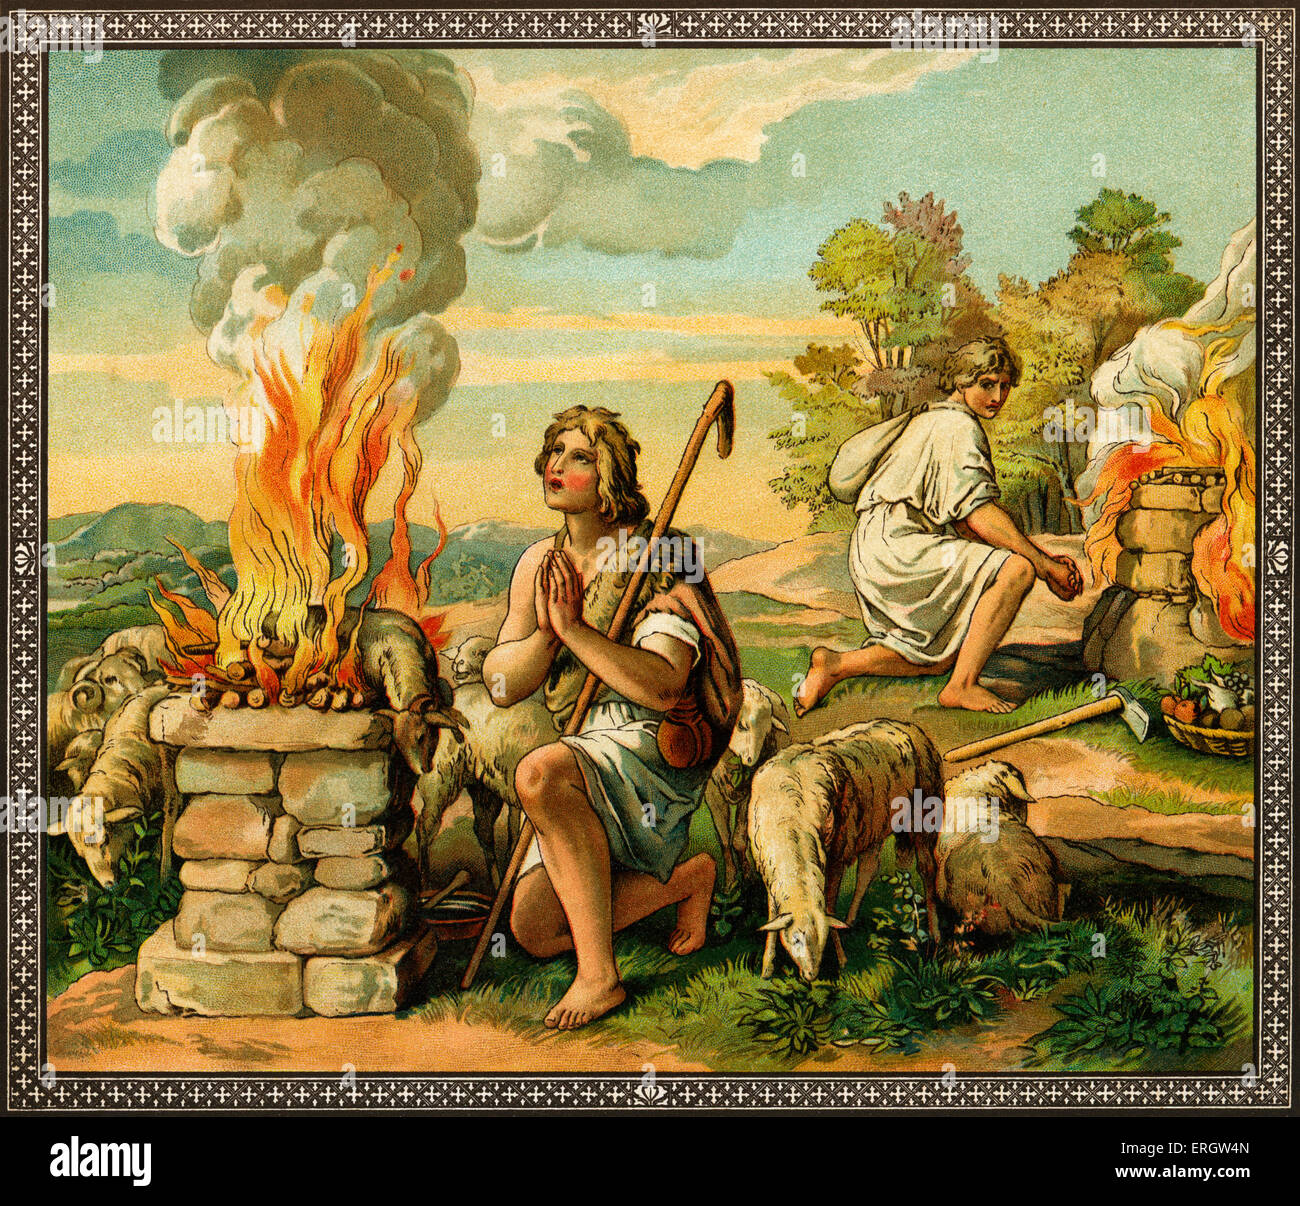 The offerings of Cain and Abel - Abel the shepherd's sacrifice is  more successful than Cain the farmer. From Old Testament Stock Photo